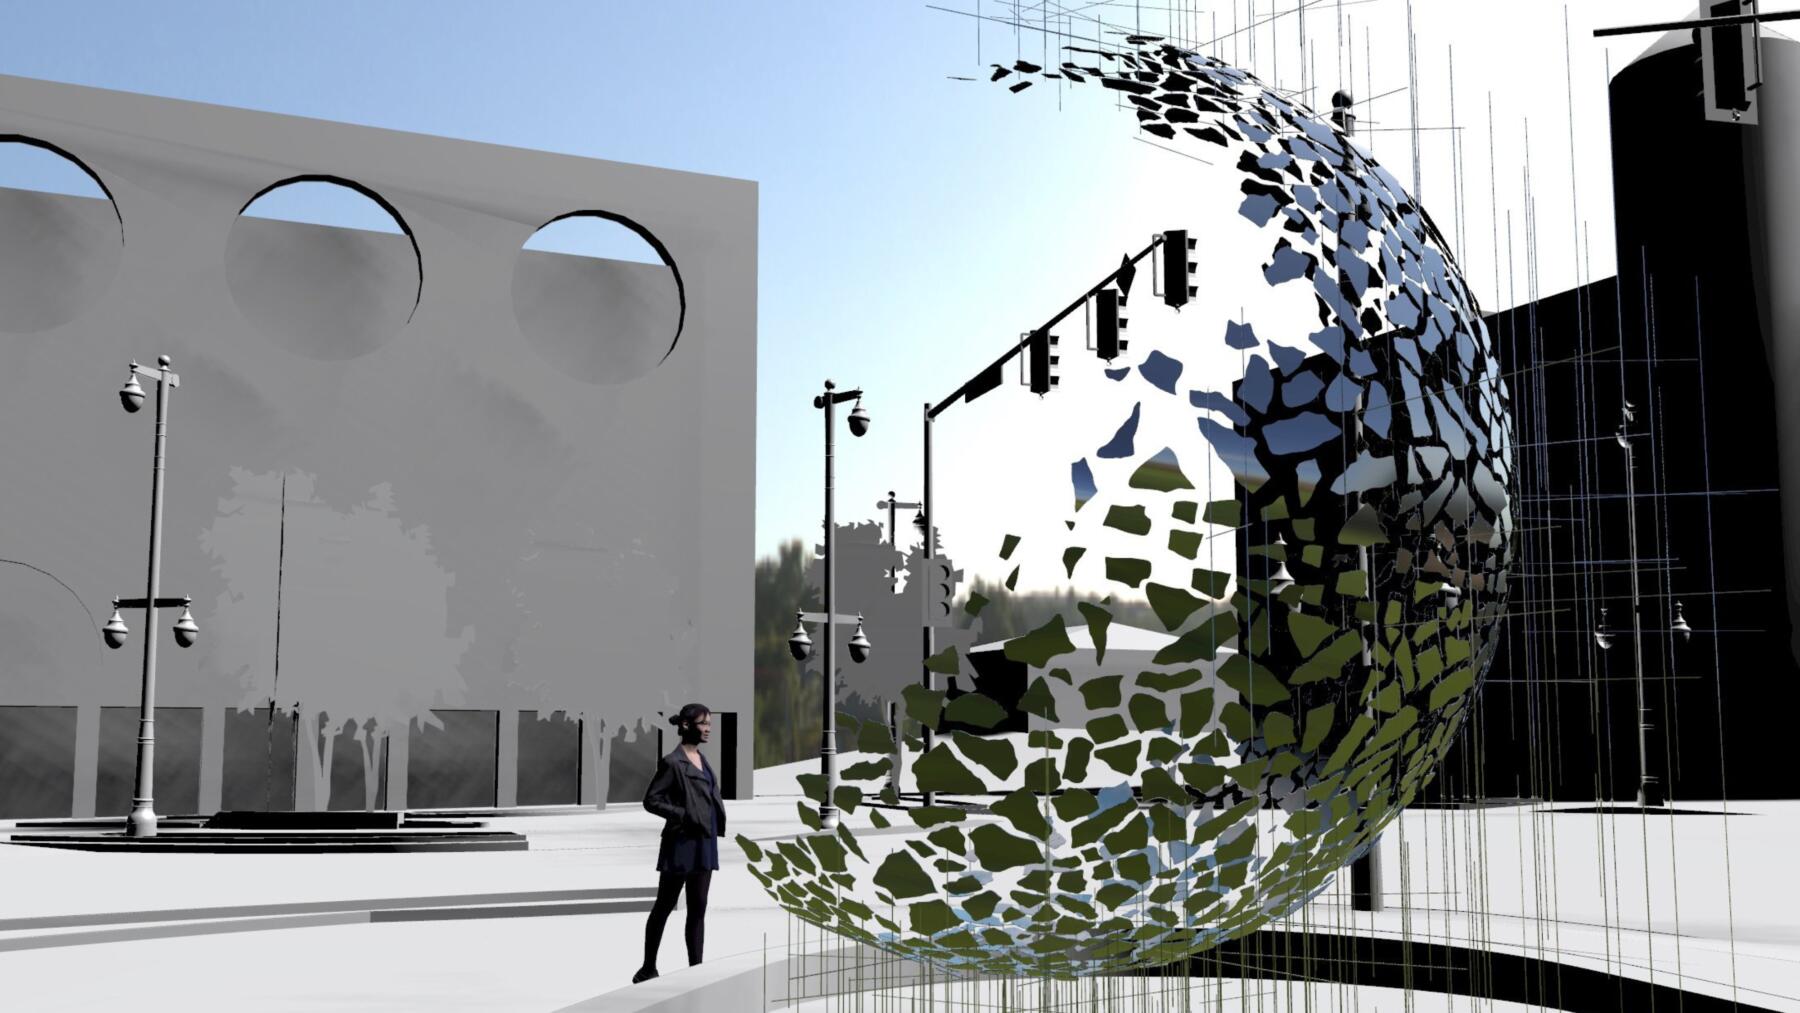 Sarah Sze Sculpture Rendering Courtesy of Congress Square Redesign